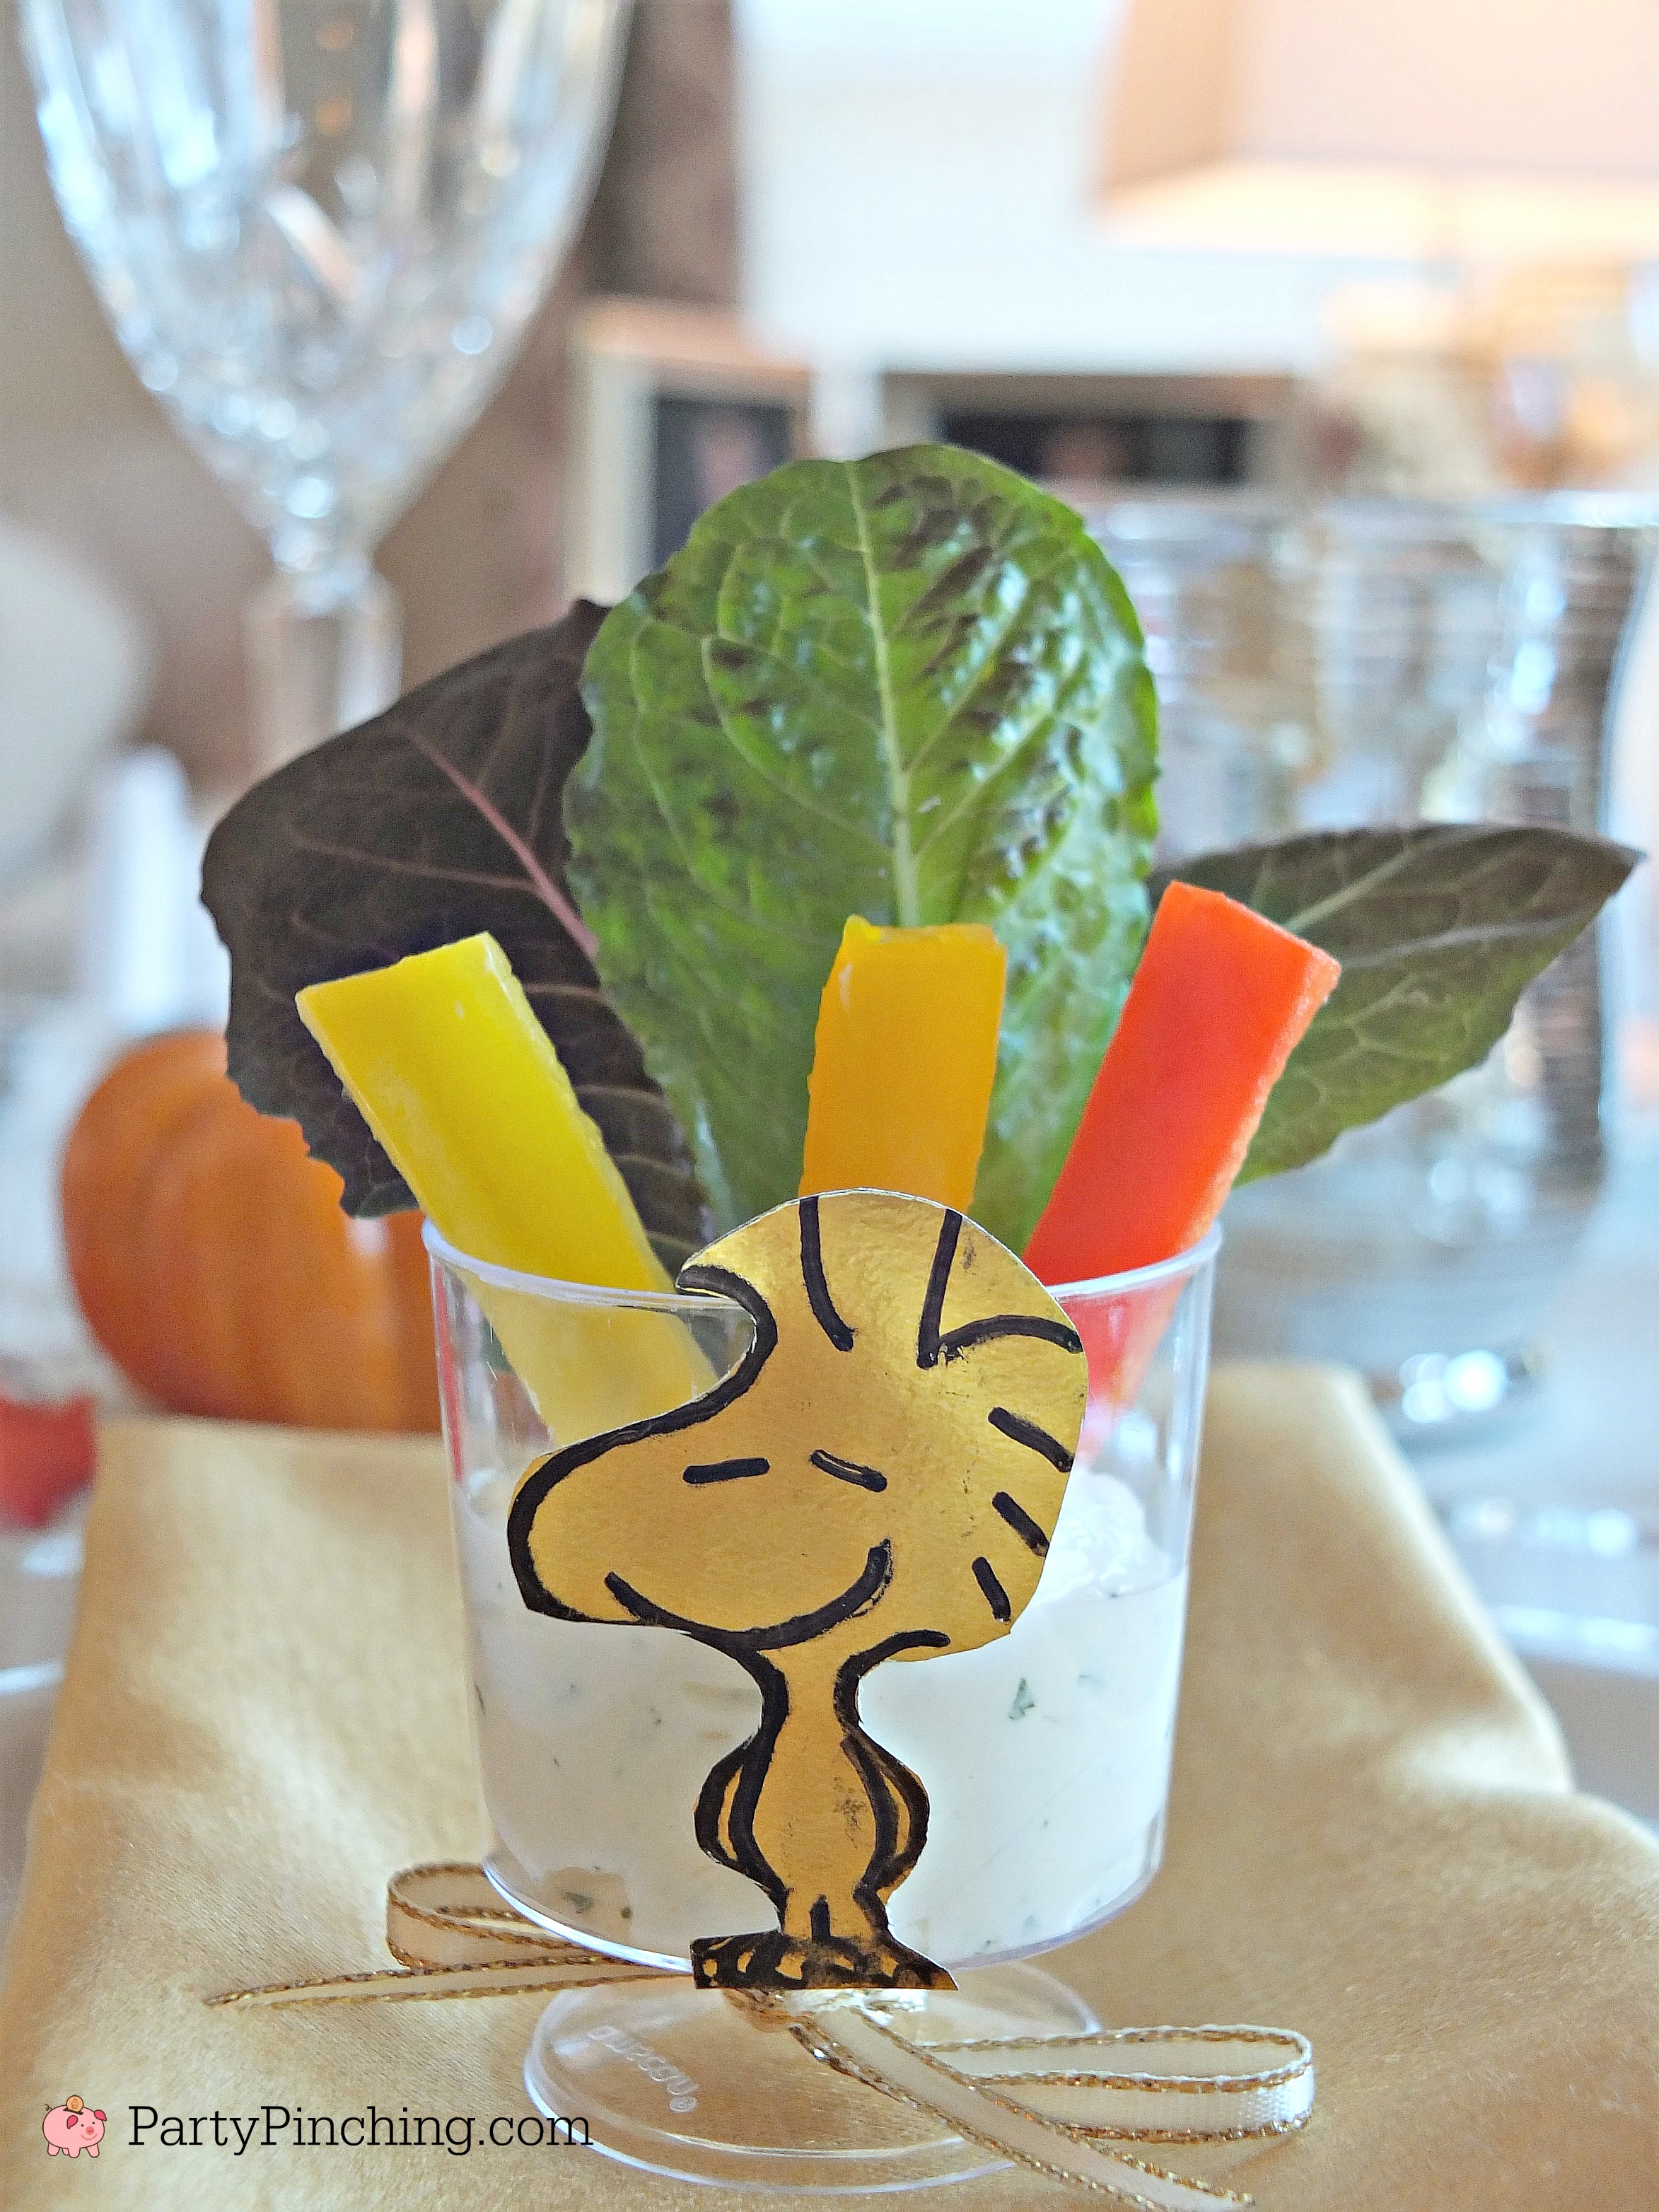 Charlie Brown Thanksgiving - Snoopy - Peanuts Turkey Dinner - Thanksgiving Birthday Party Food Ideas